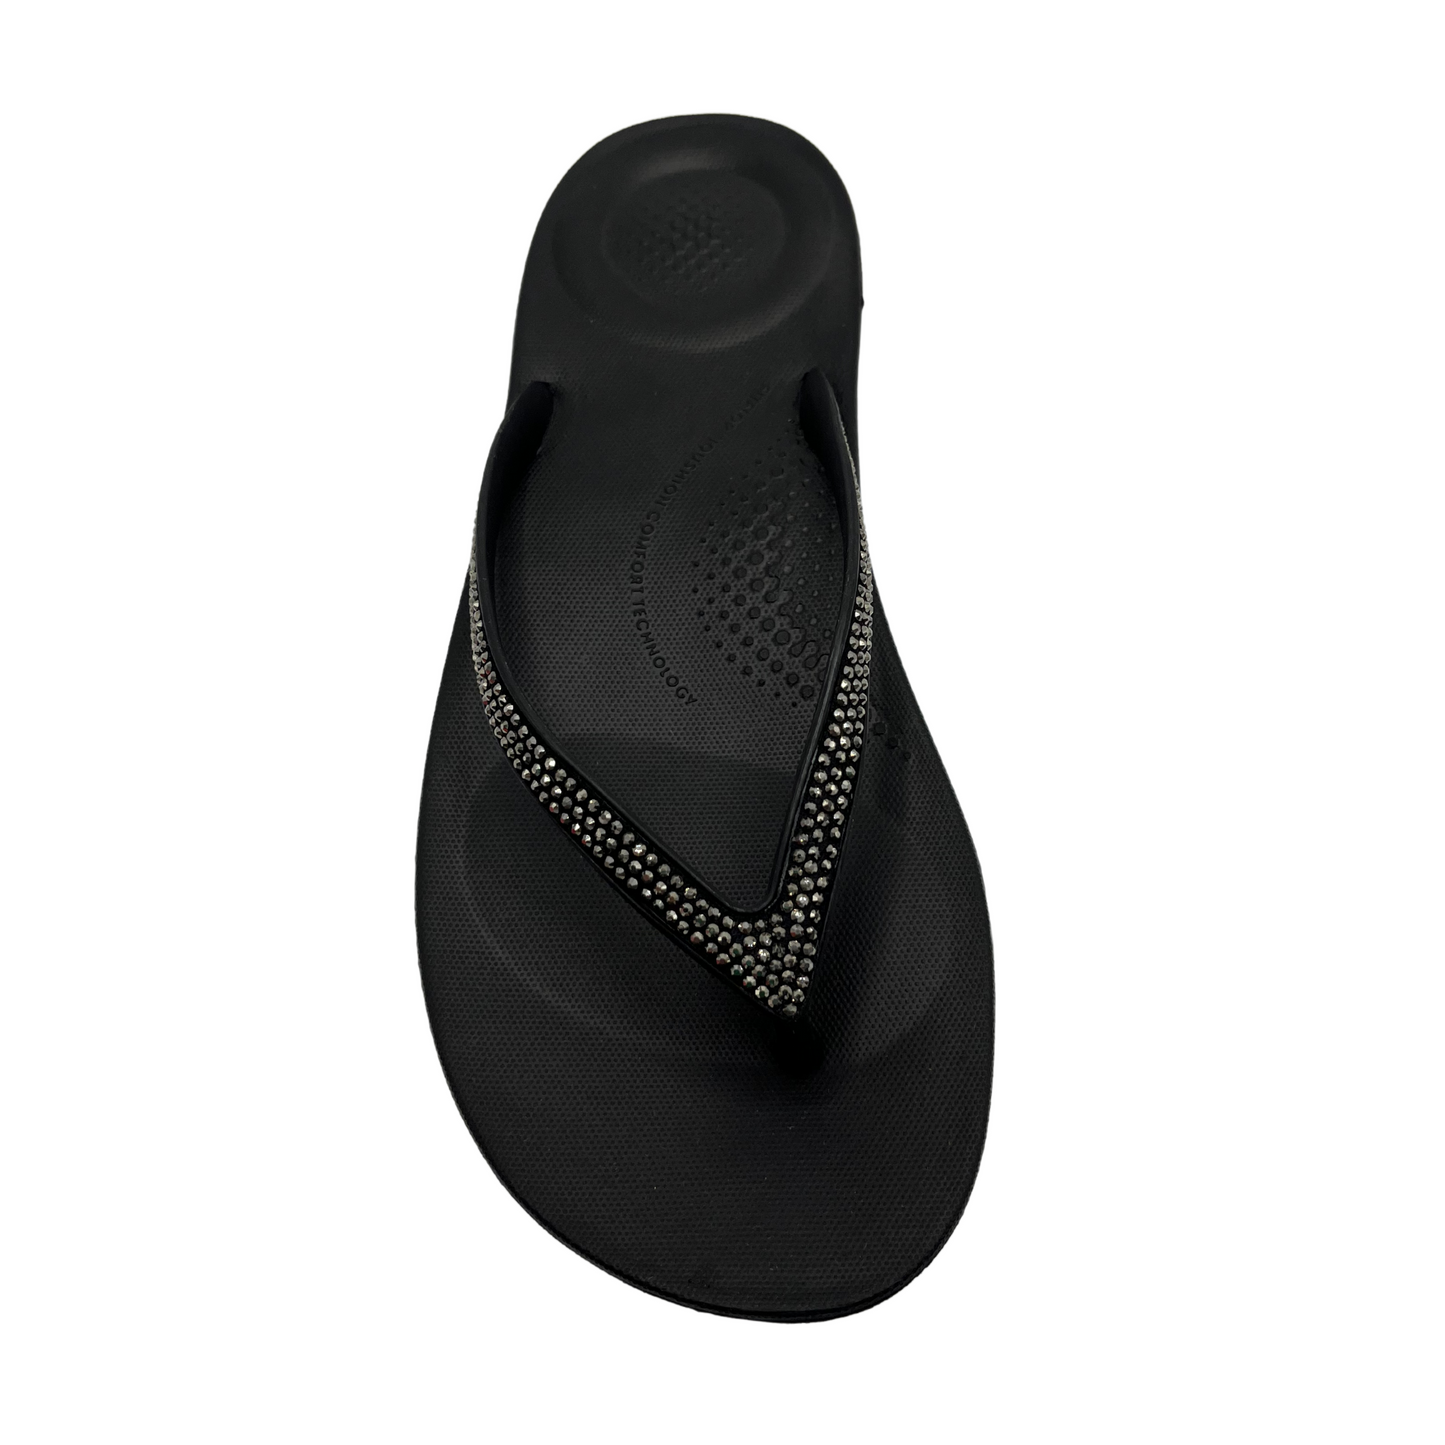 Top view of black flip flop with bejewelled thong strap